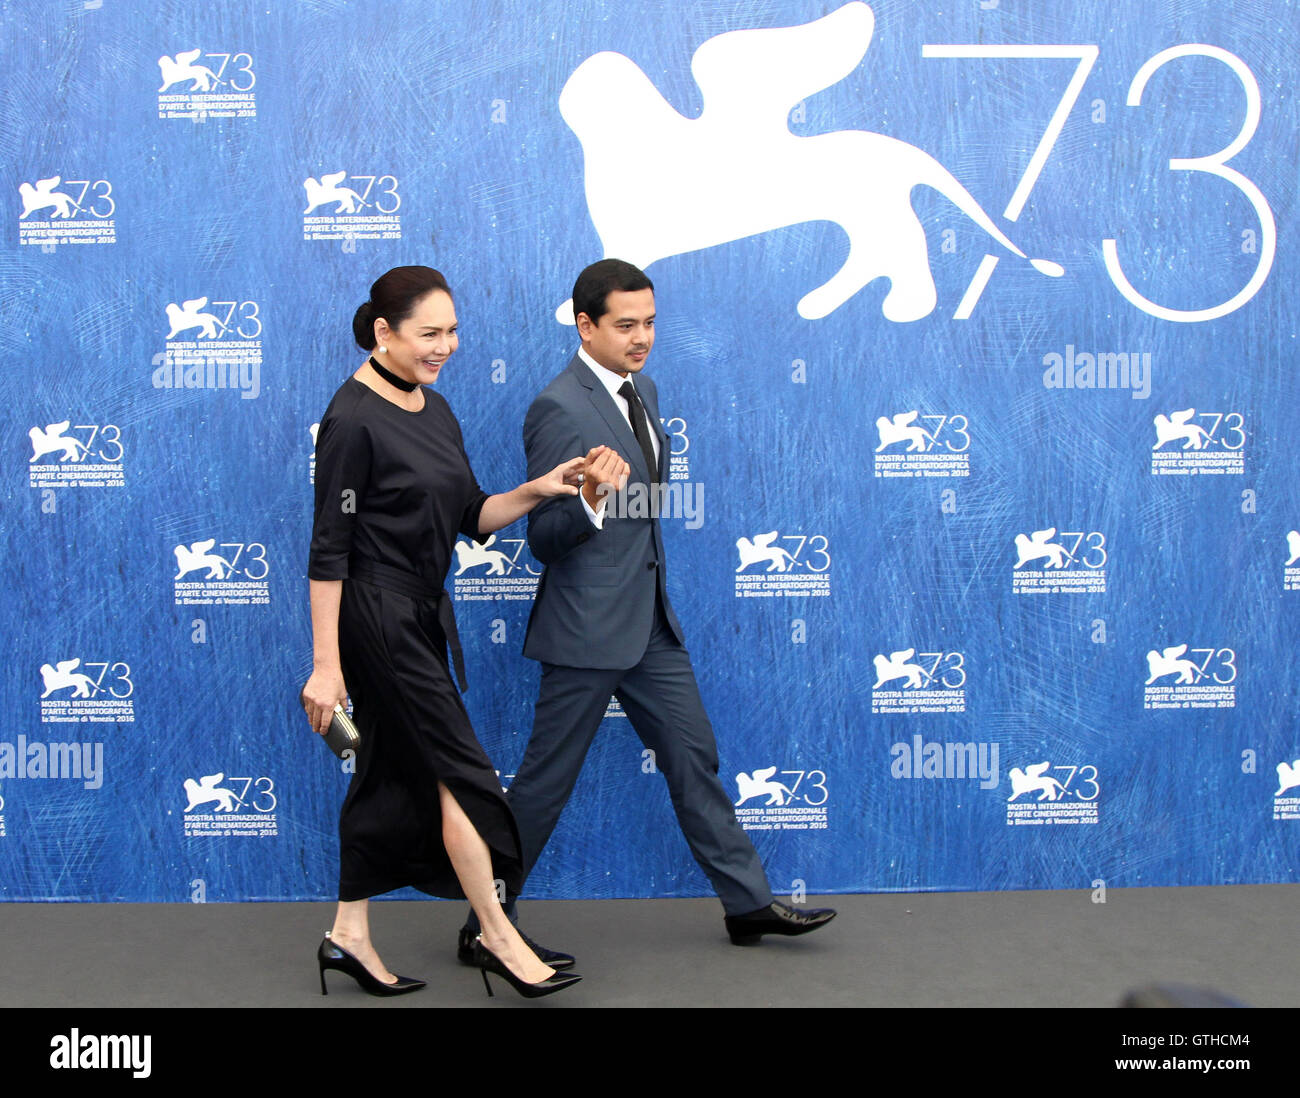 Venice, Italy. 09th Sep, 2016. Actress Charo Santos-Concio and actor John Lloyd Cruz attends 'Ang Babaeng Humayo (The Woman who left)' Photocall during the 73rd Venice Film Festival. Credit:  Andrea Spinelli/Pacific Press/Alamy Live News Stock Photo